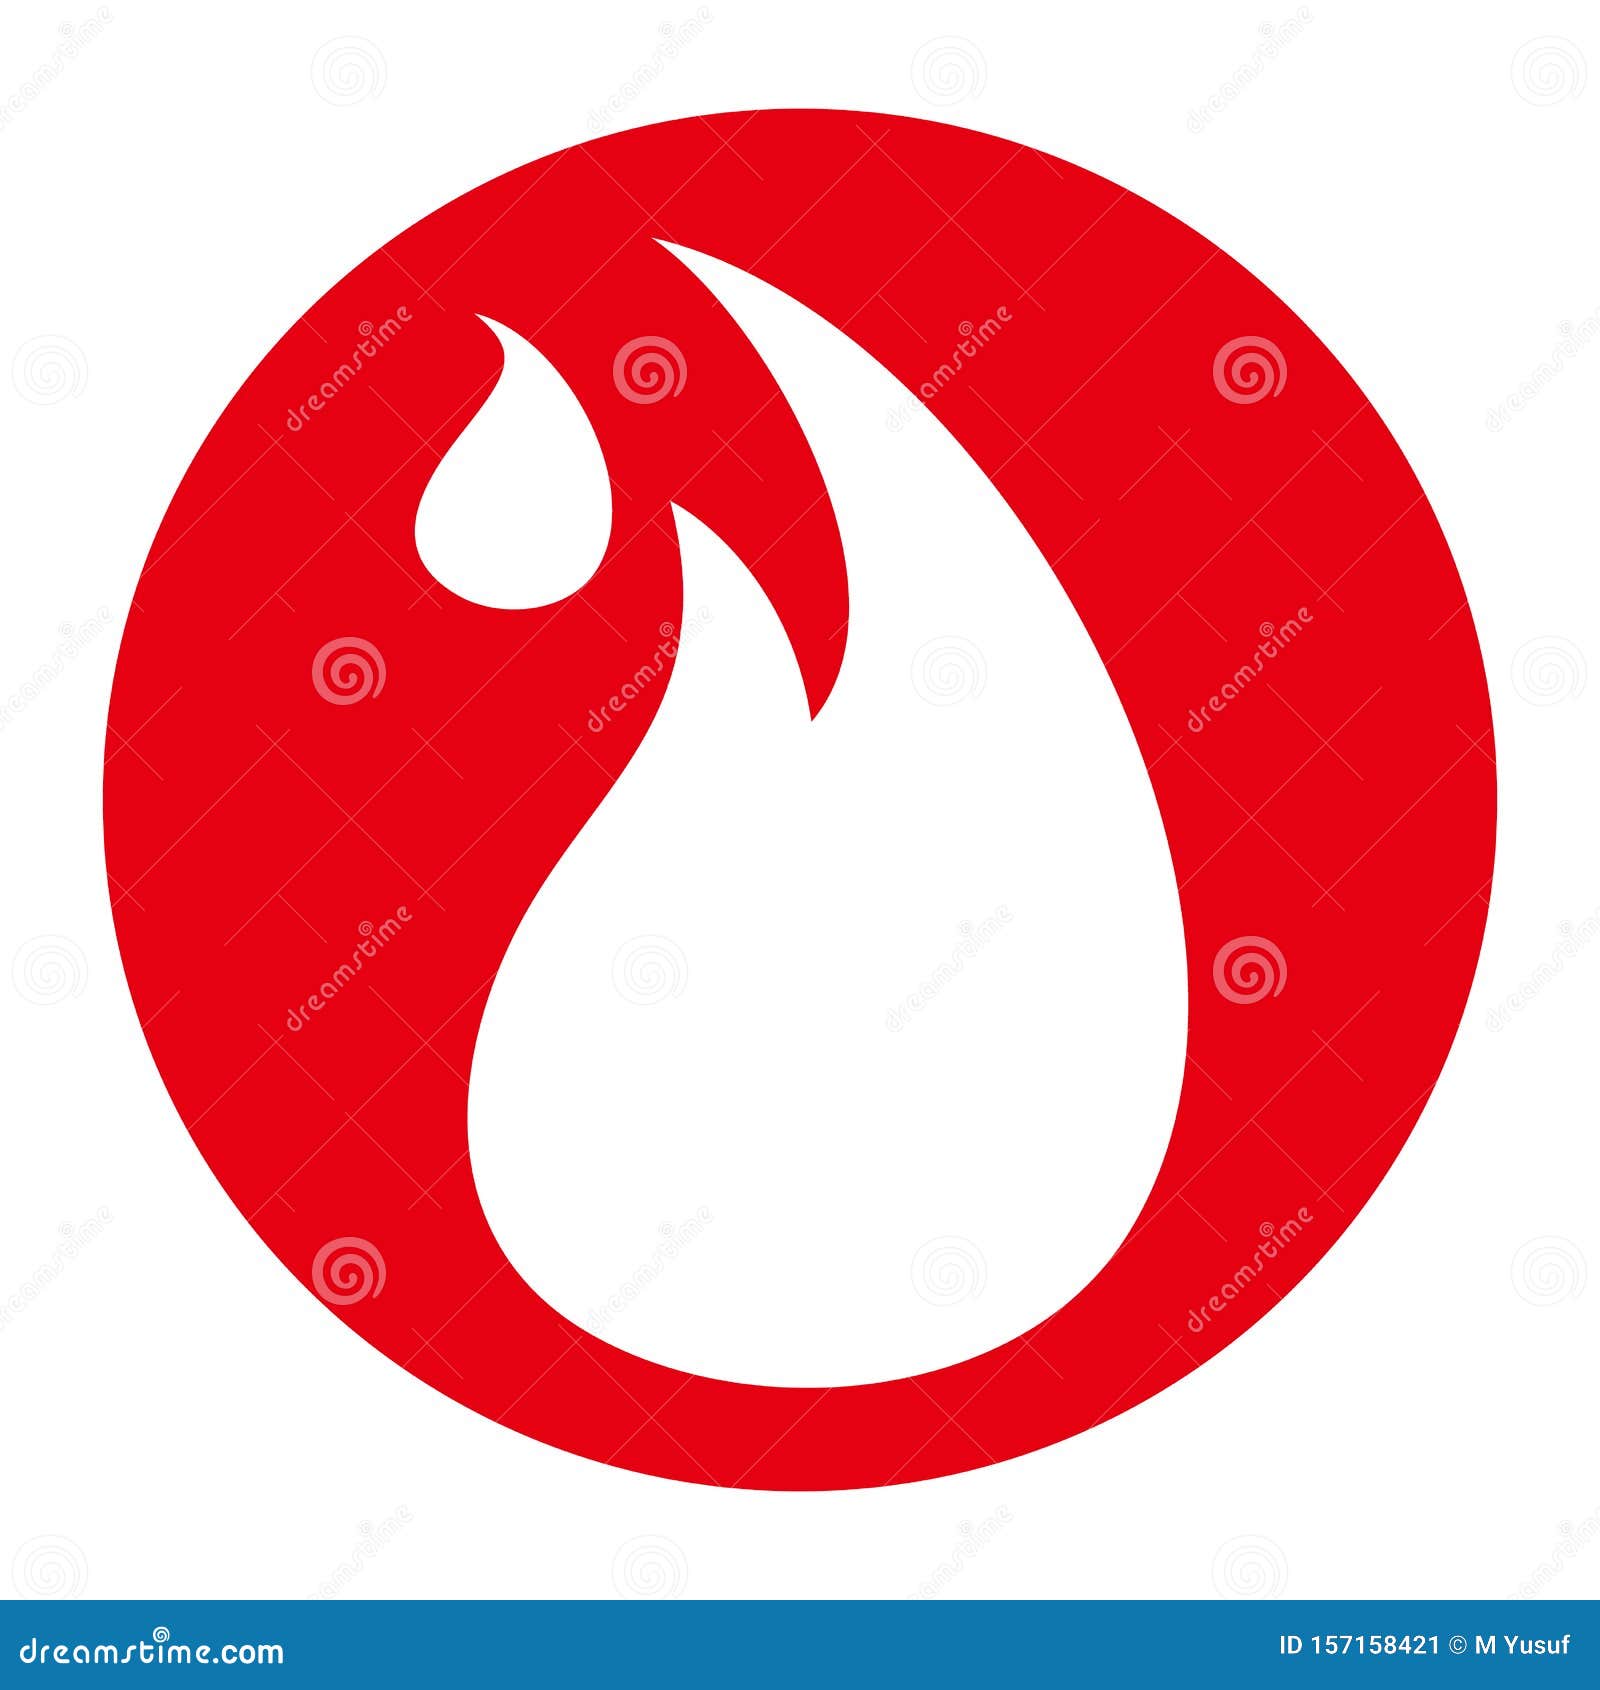 Fire Icon Fire Icon Vector Fire Icon Eps Fire Icon Jpg Fire Icon Picture Stock Vector Illustration Of Glow Background 157158421